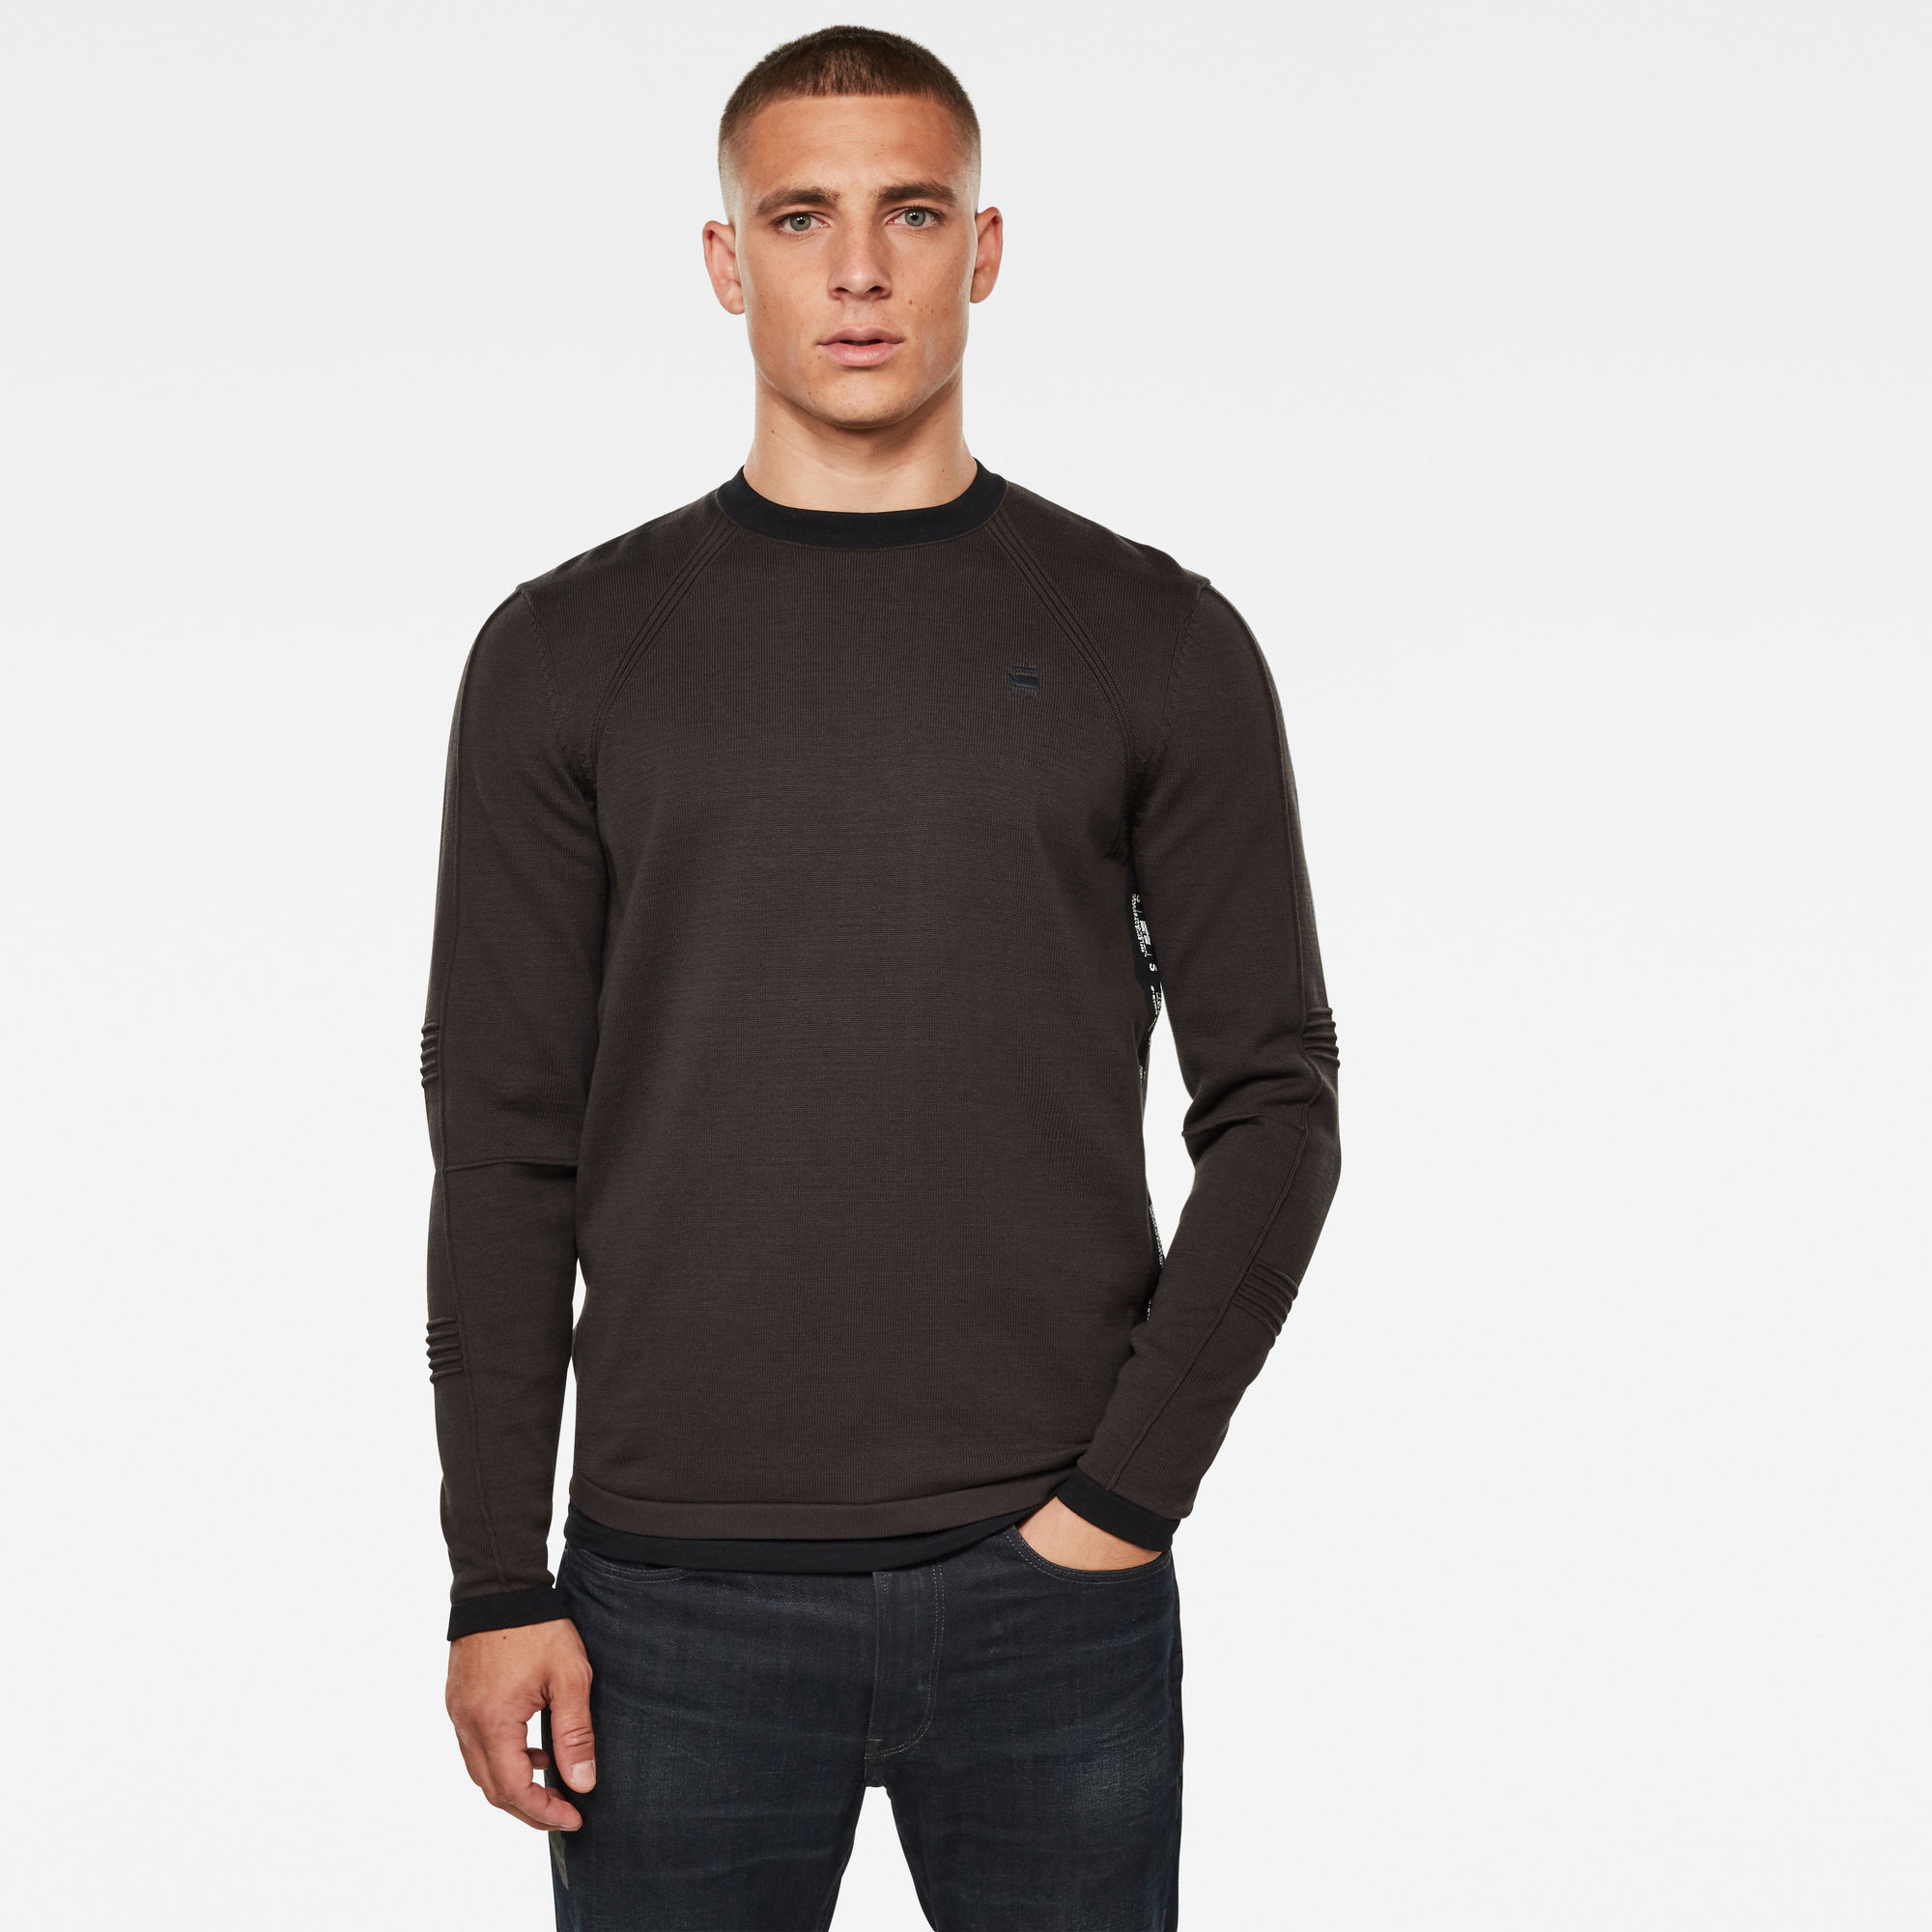 Motac Straight Knitted Sweater | Grey | G-Star RAW®